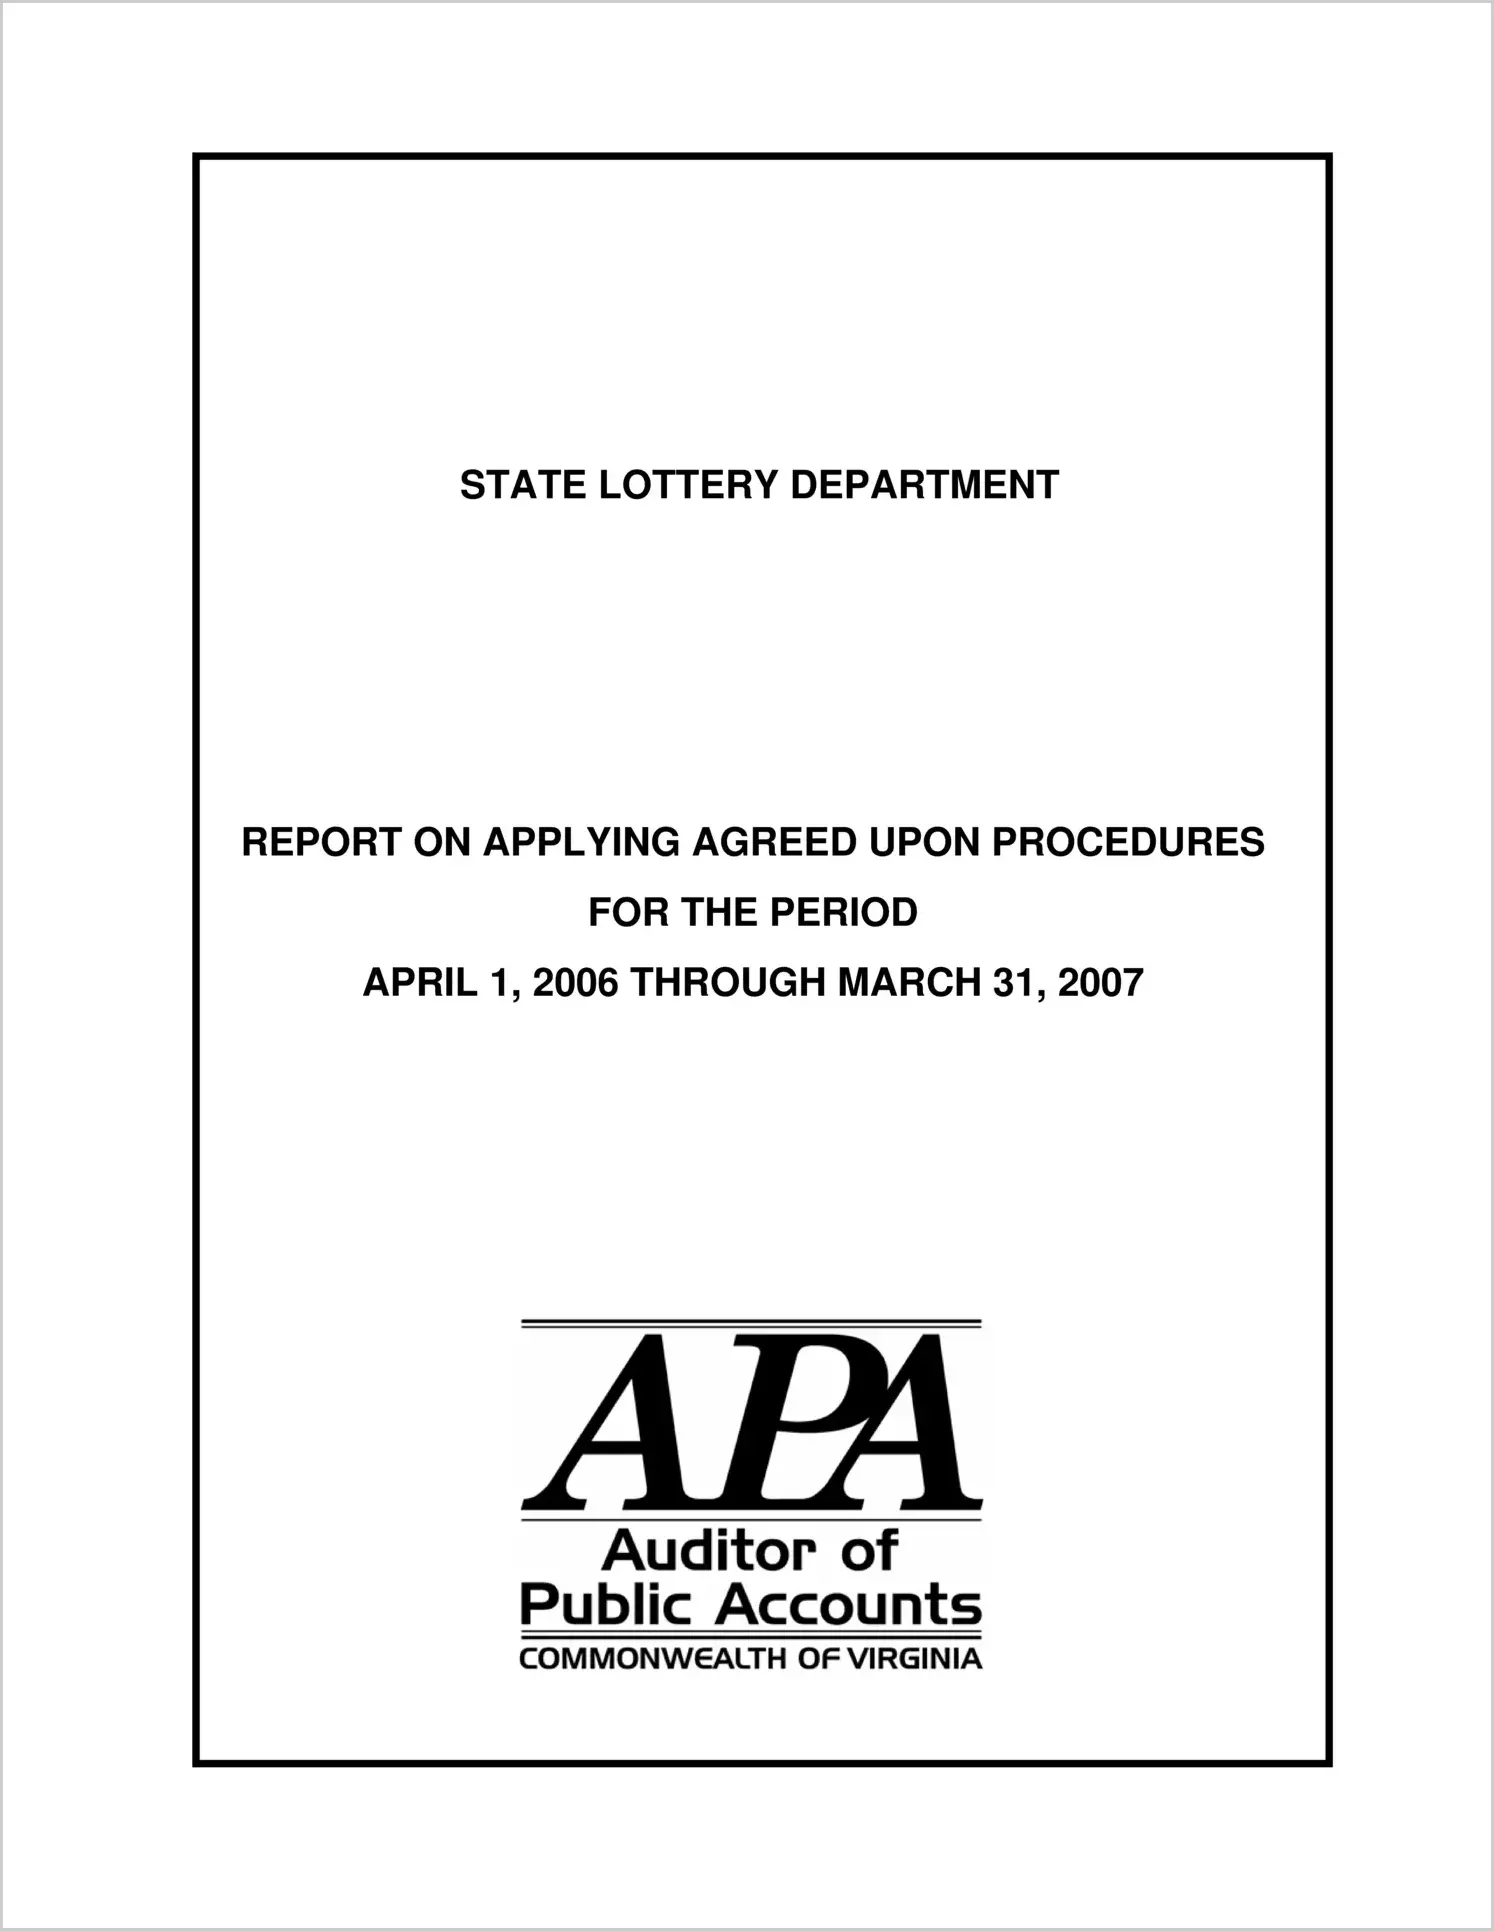 State Lottery Department Report on Applying Agreed-Upon Procedures (Mega Millions) (Report Period: 4/1/06 - 3/31/07)